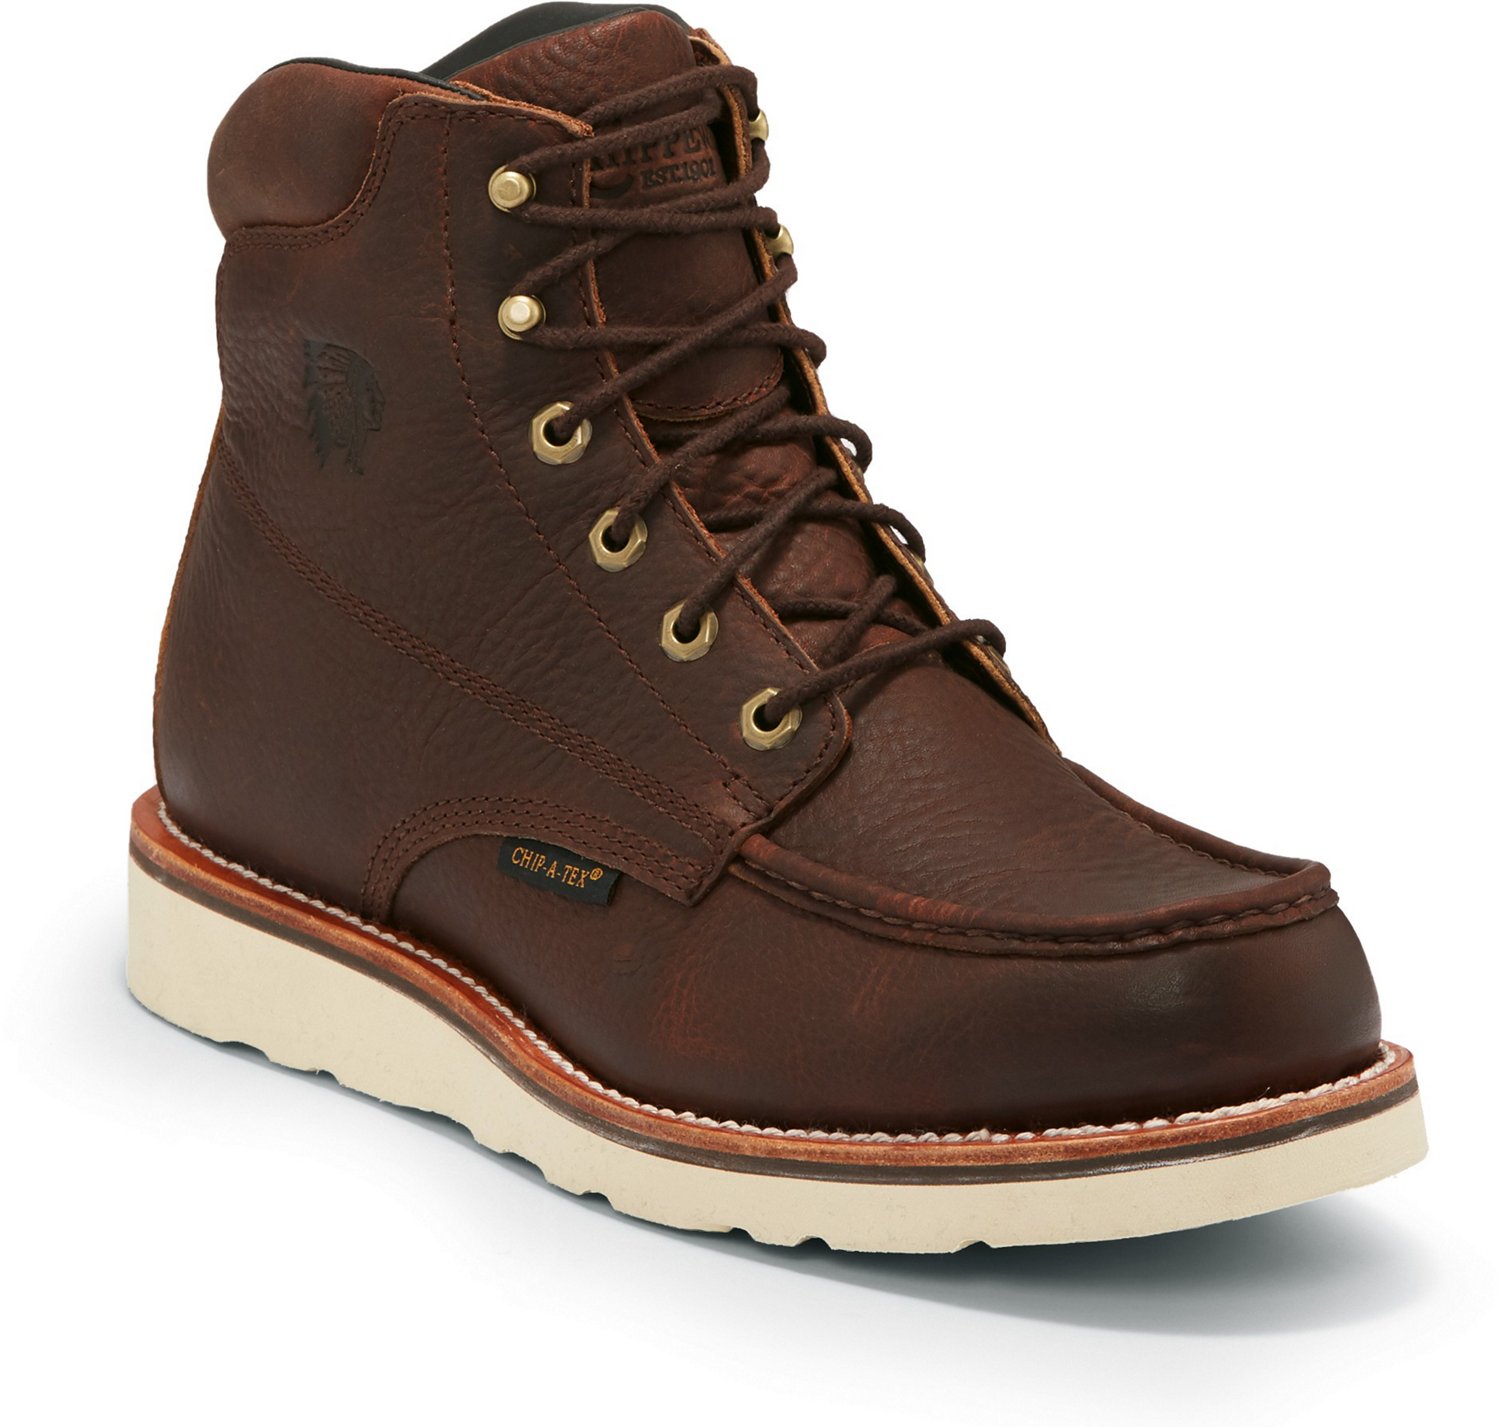 Chippewa Boots Men's 6 in Waterproof Mocc Toe Boots | Academy